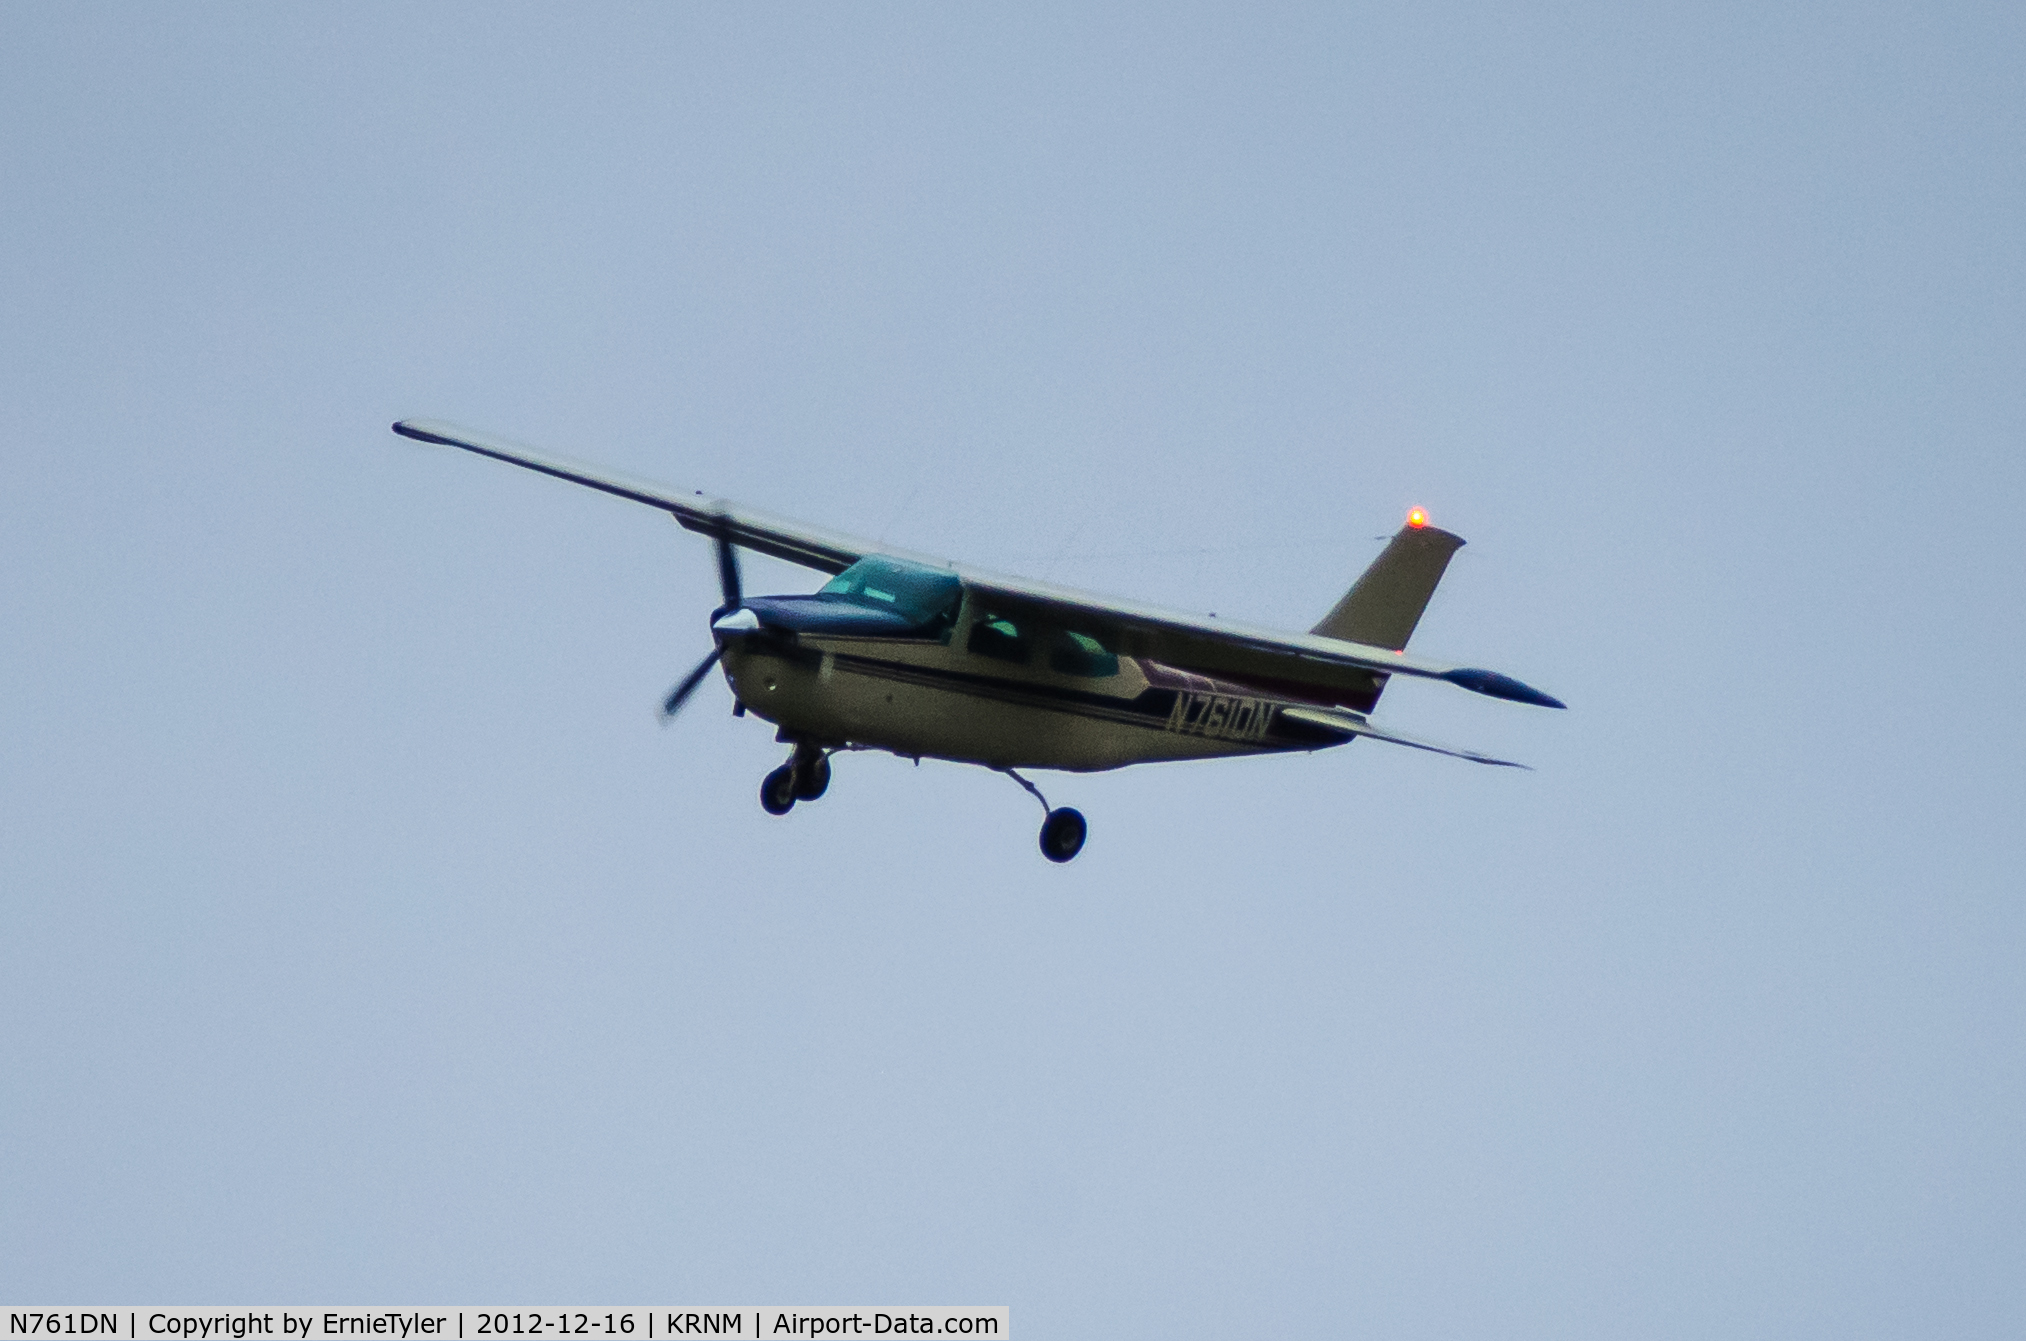 N761DN, 1977 Cessna T210M Turbo Centurion C/N 21062175, A shot on approach to Ramona Airport as it passed over Rangeland Rd and the Ramona Grasslands.